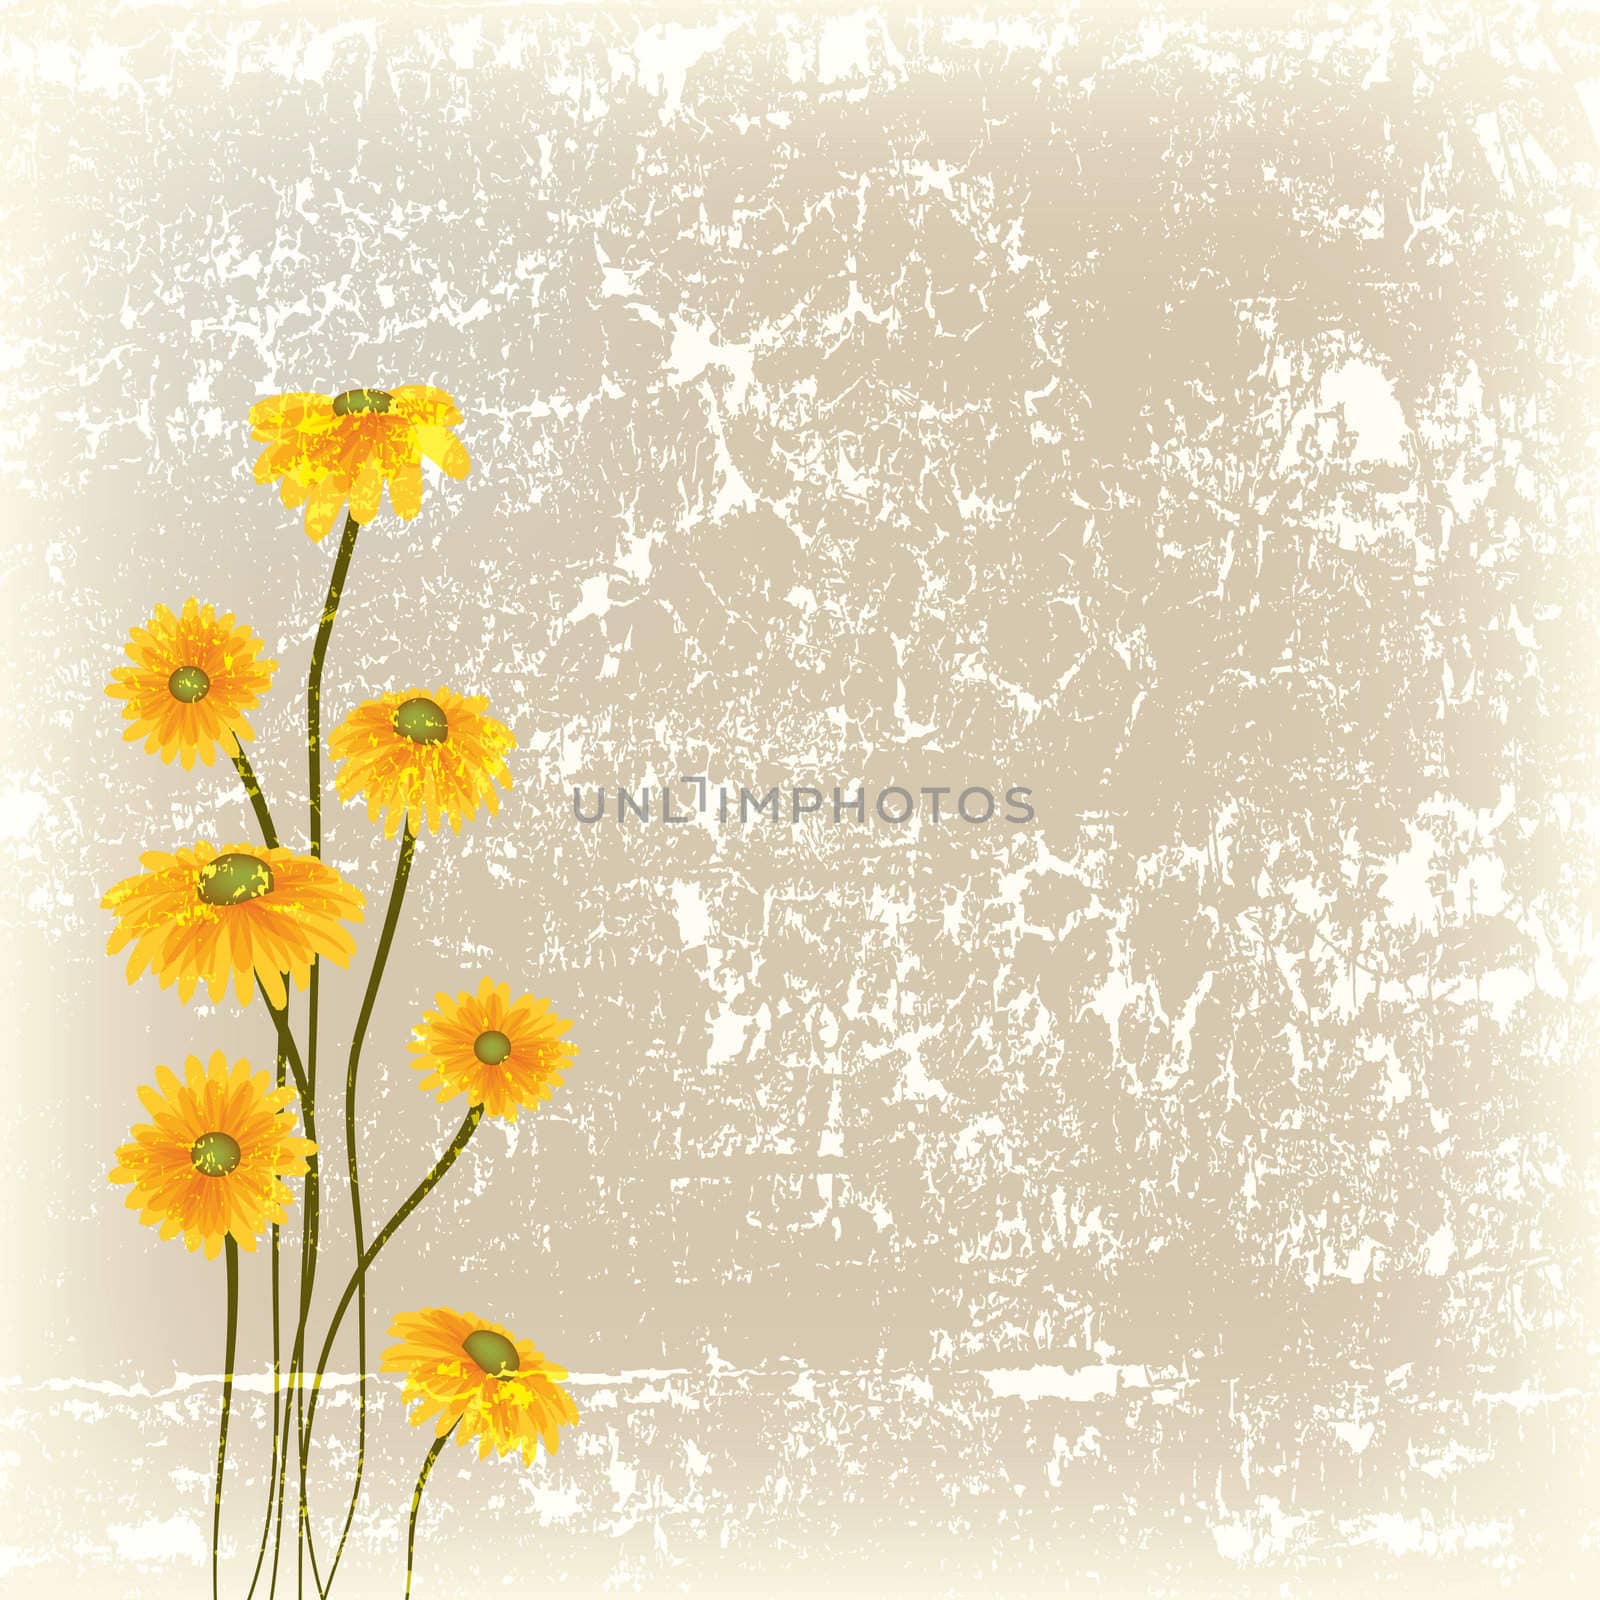 abstract grunge illustration with yellow flowers on cracked background